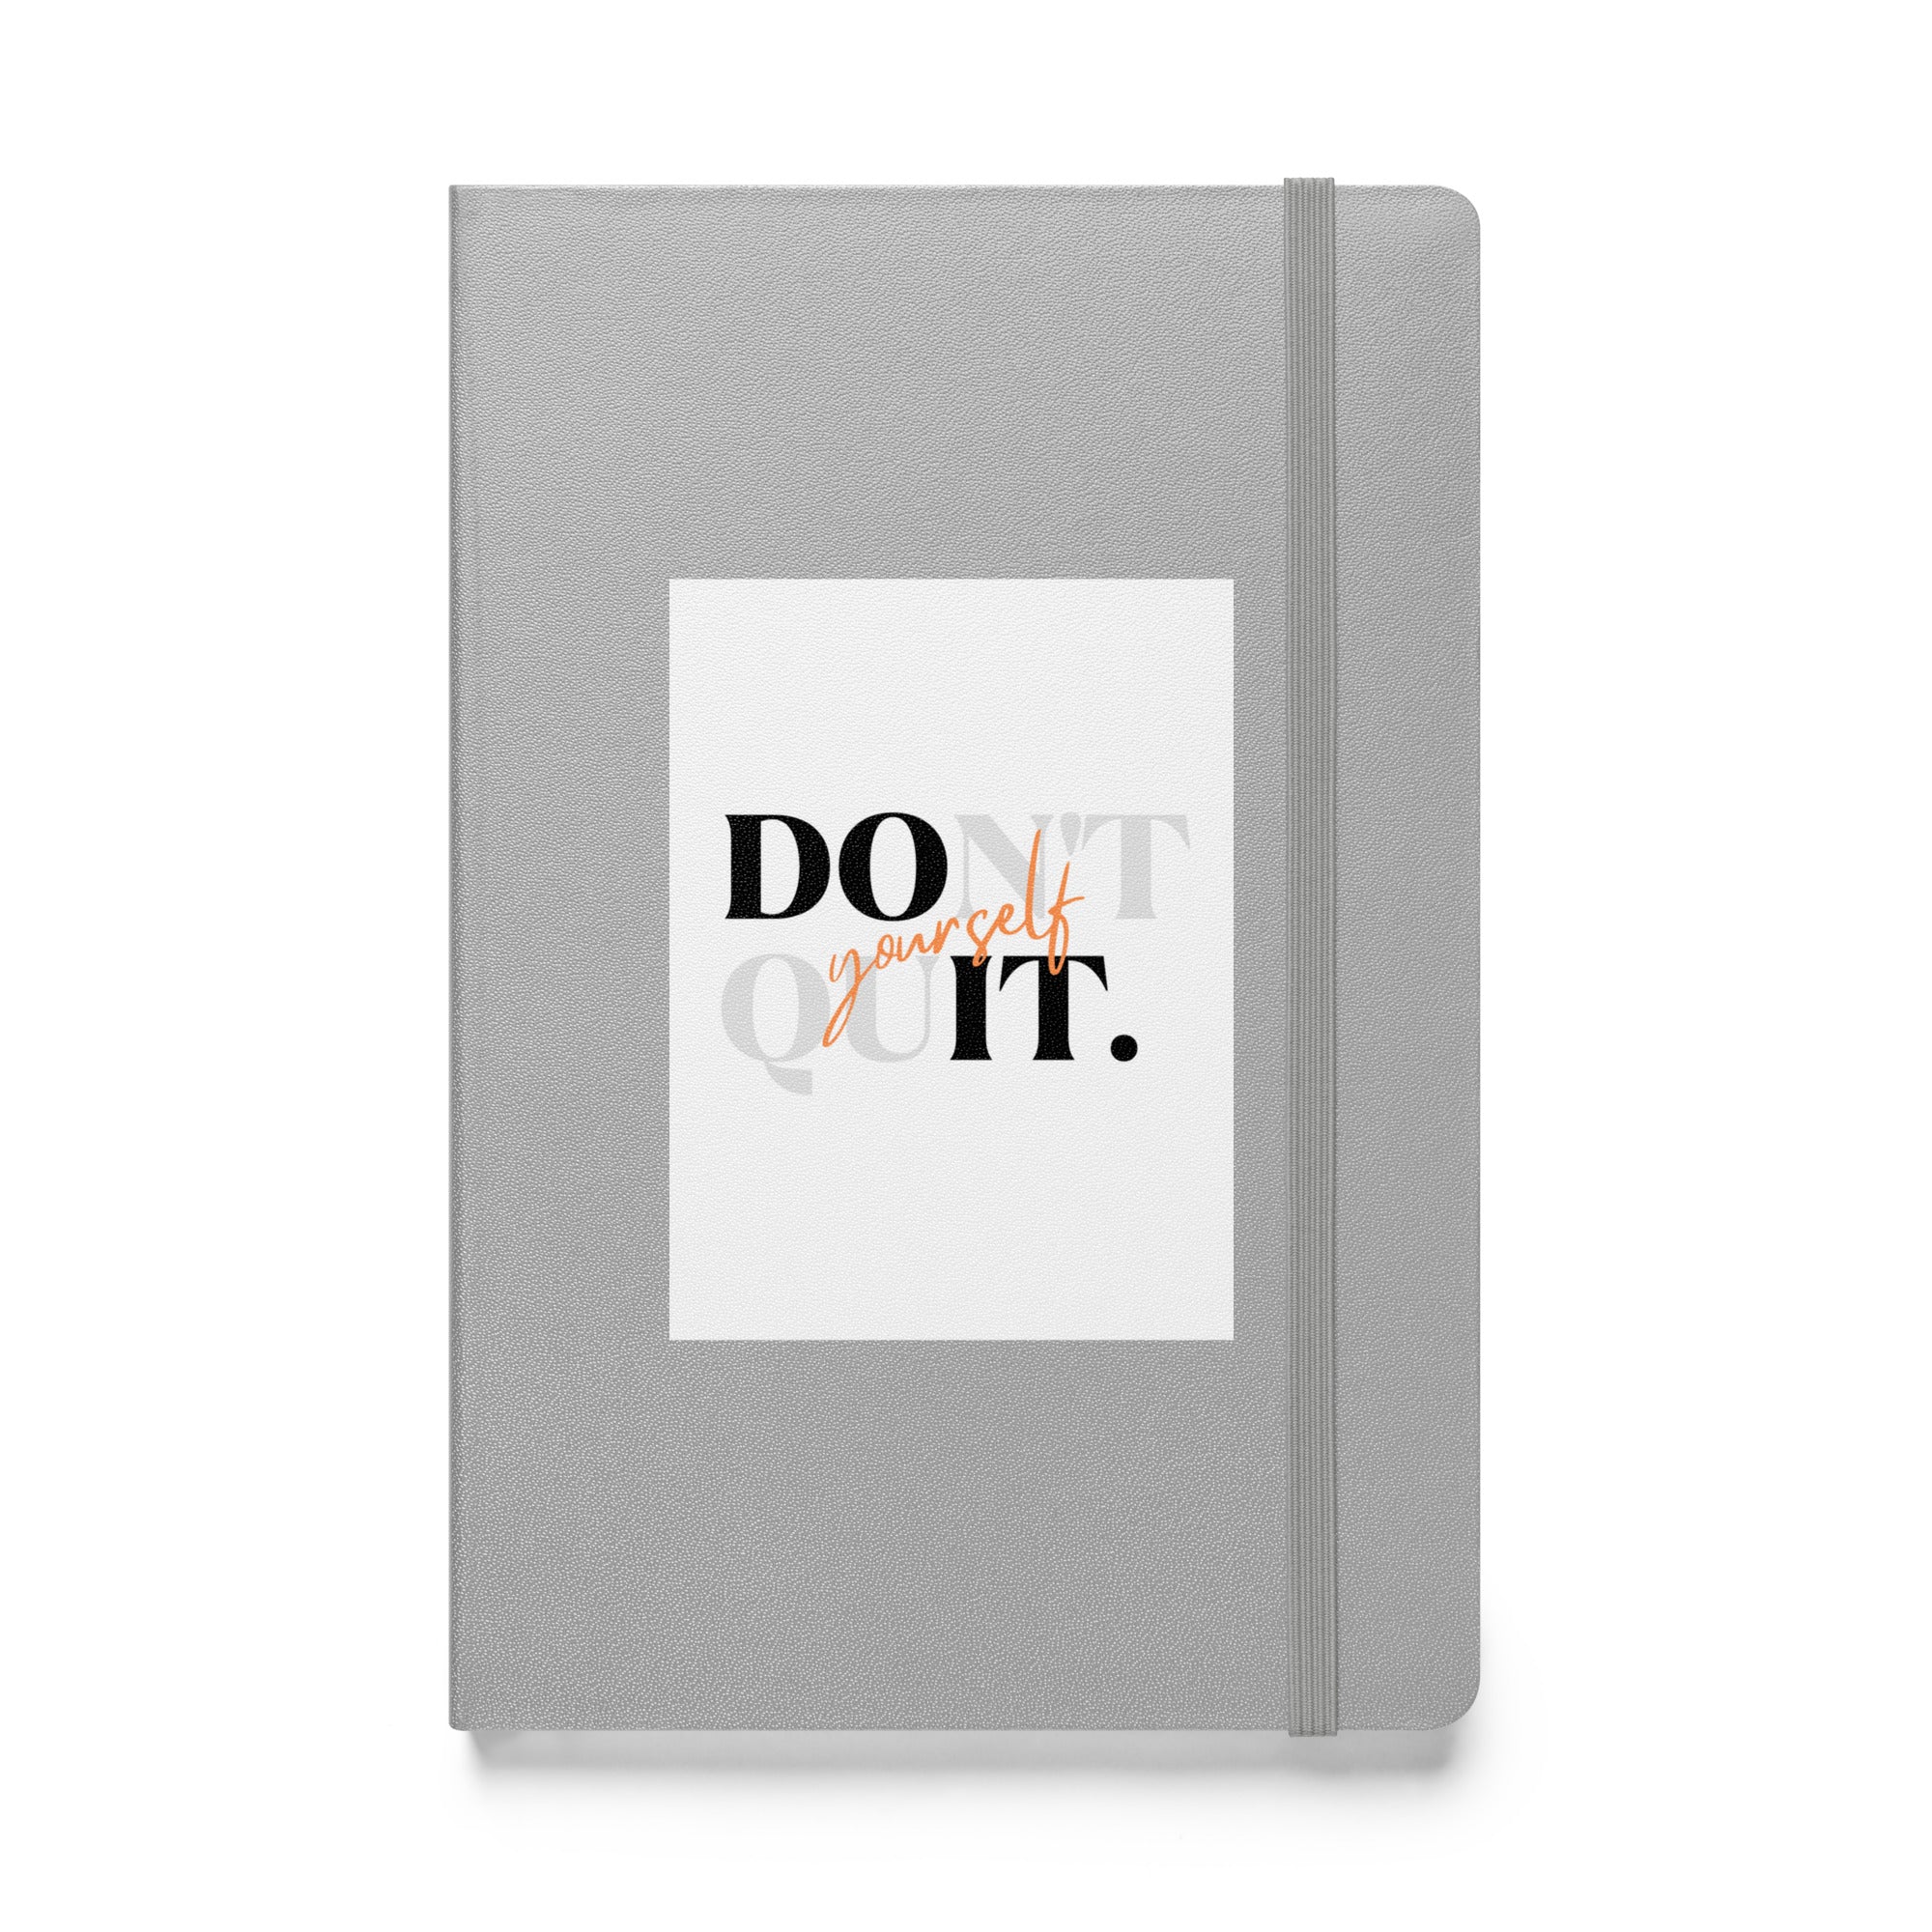 Don't Quit Yourself Hardcover bound notebook